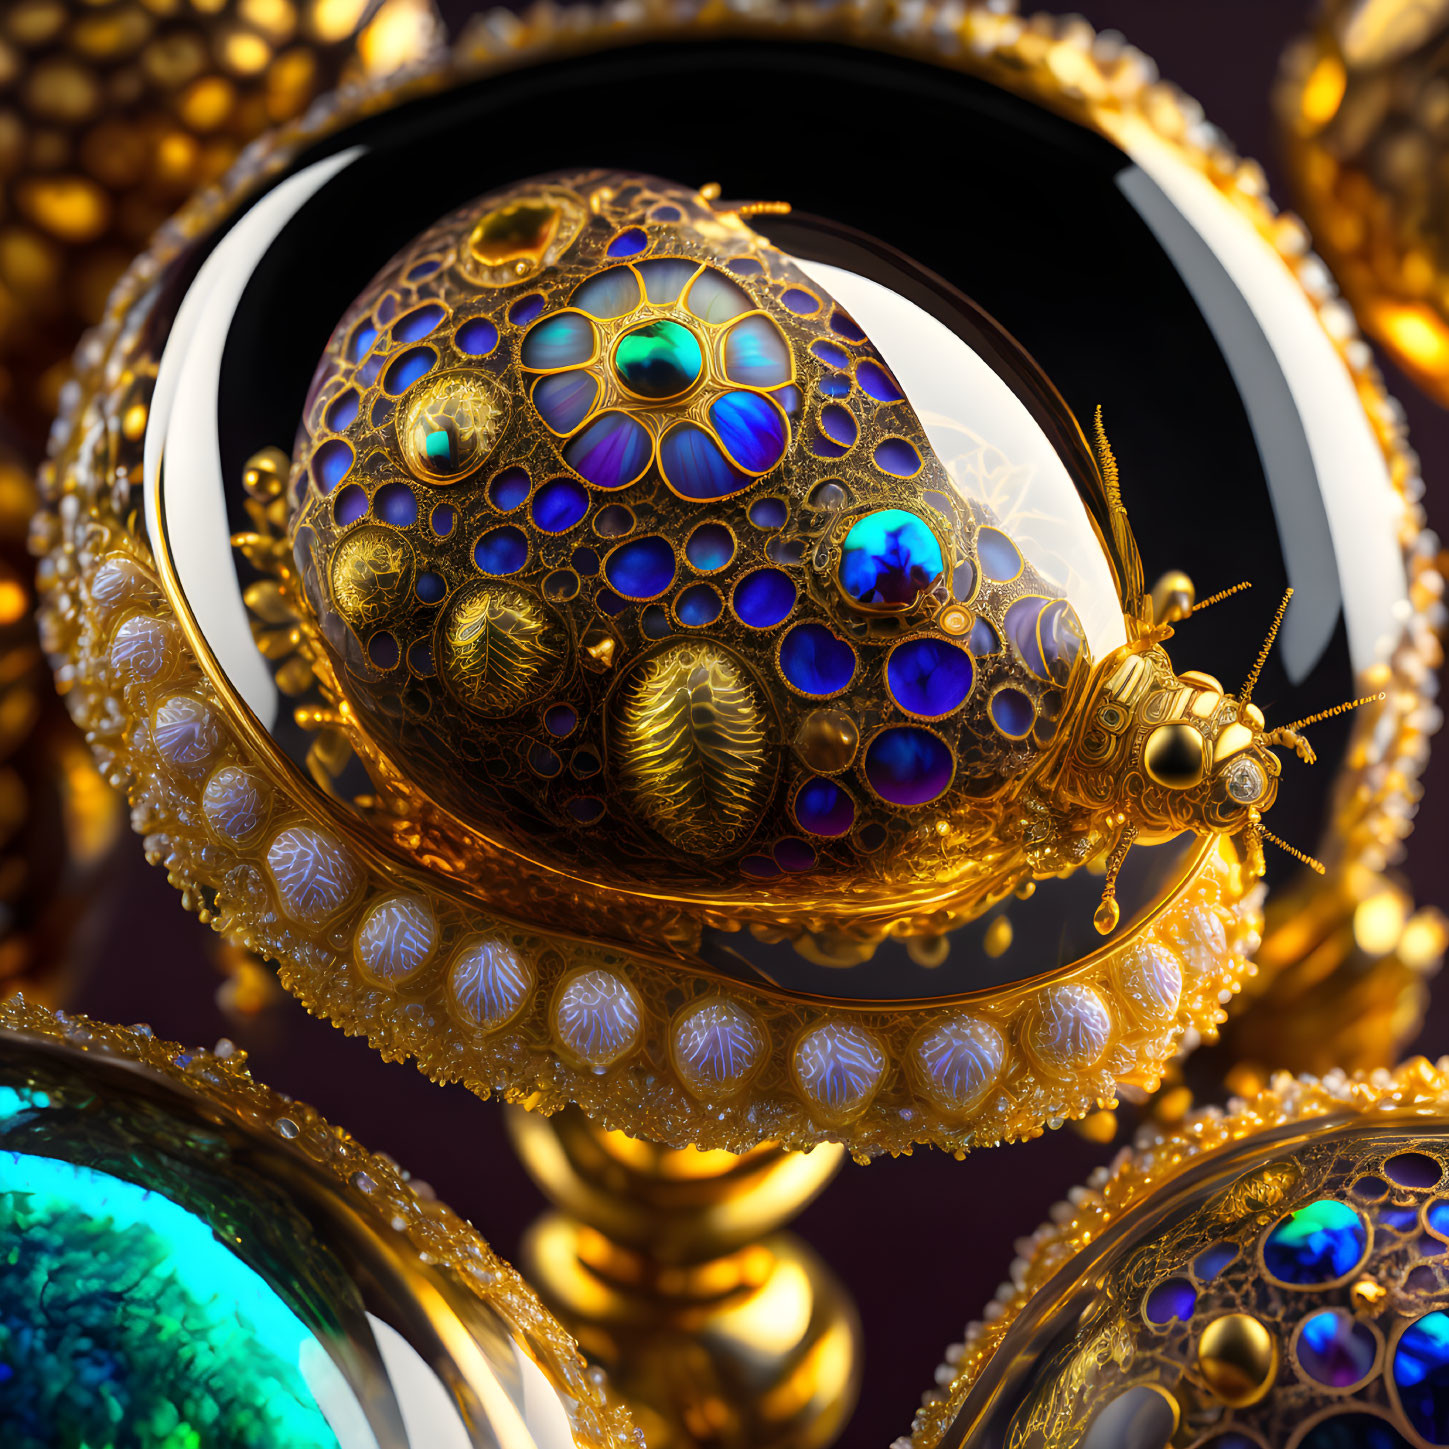 Golden spherical structures with intricate patterns and gemstones on a dark background.